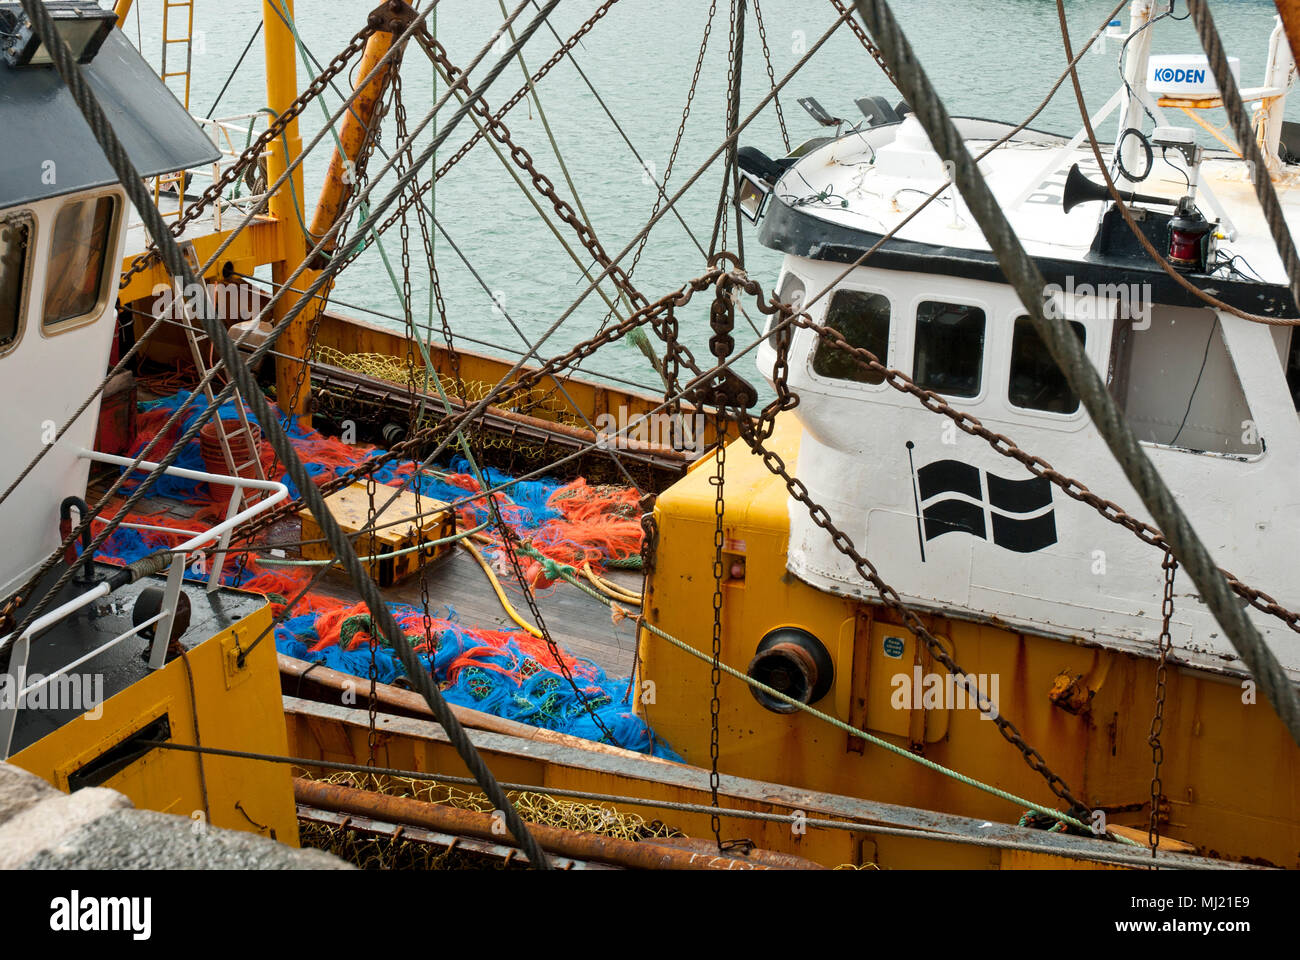 A beam trawler fishing vessel showing the cornish flag of St Piran, as well as colourful nets. Moored in Newlyn harbour the UKs biggest fishing fleet. Stock Photo